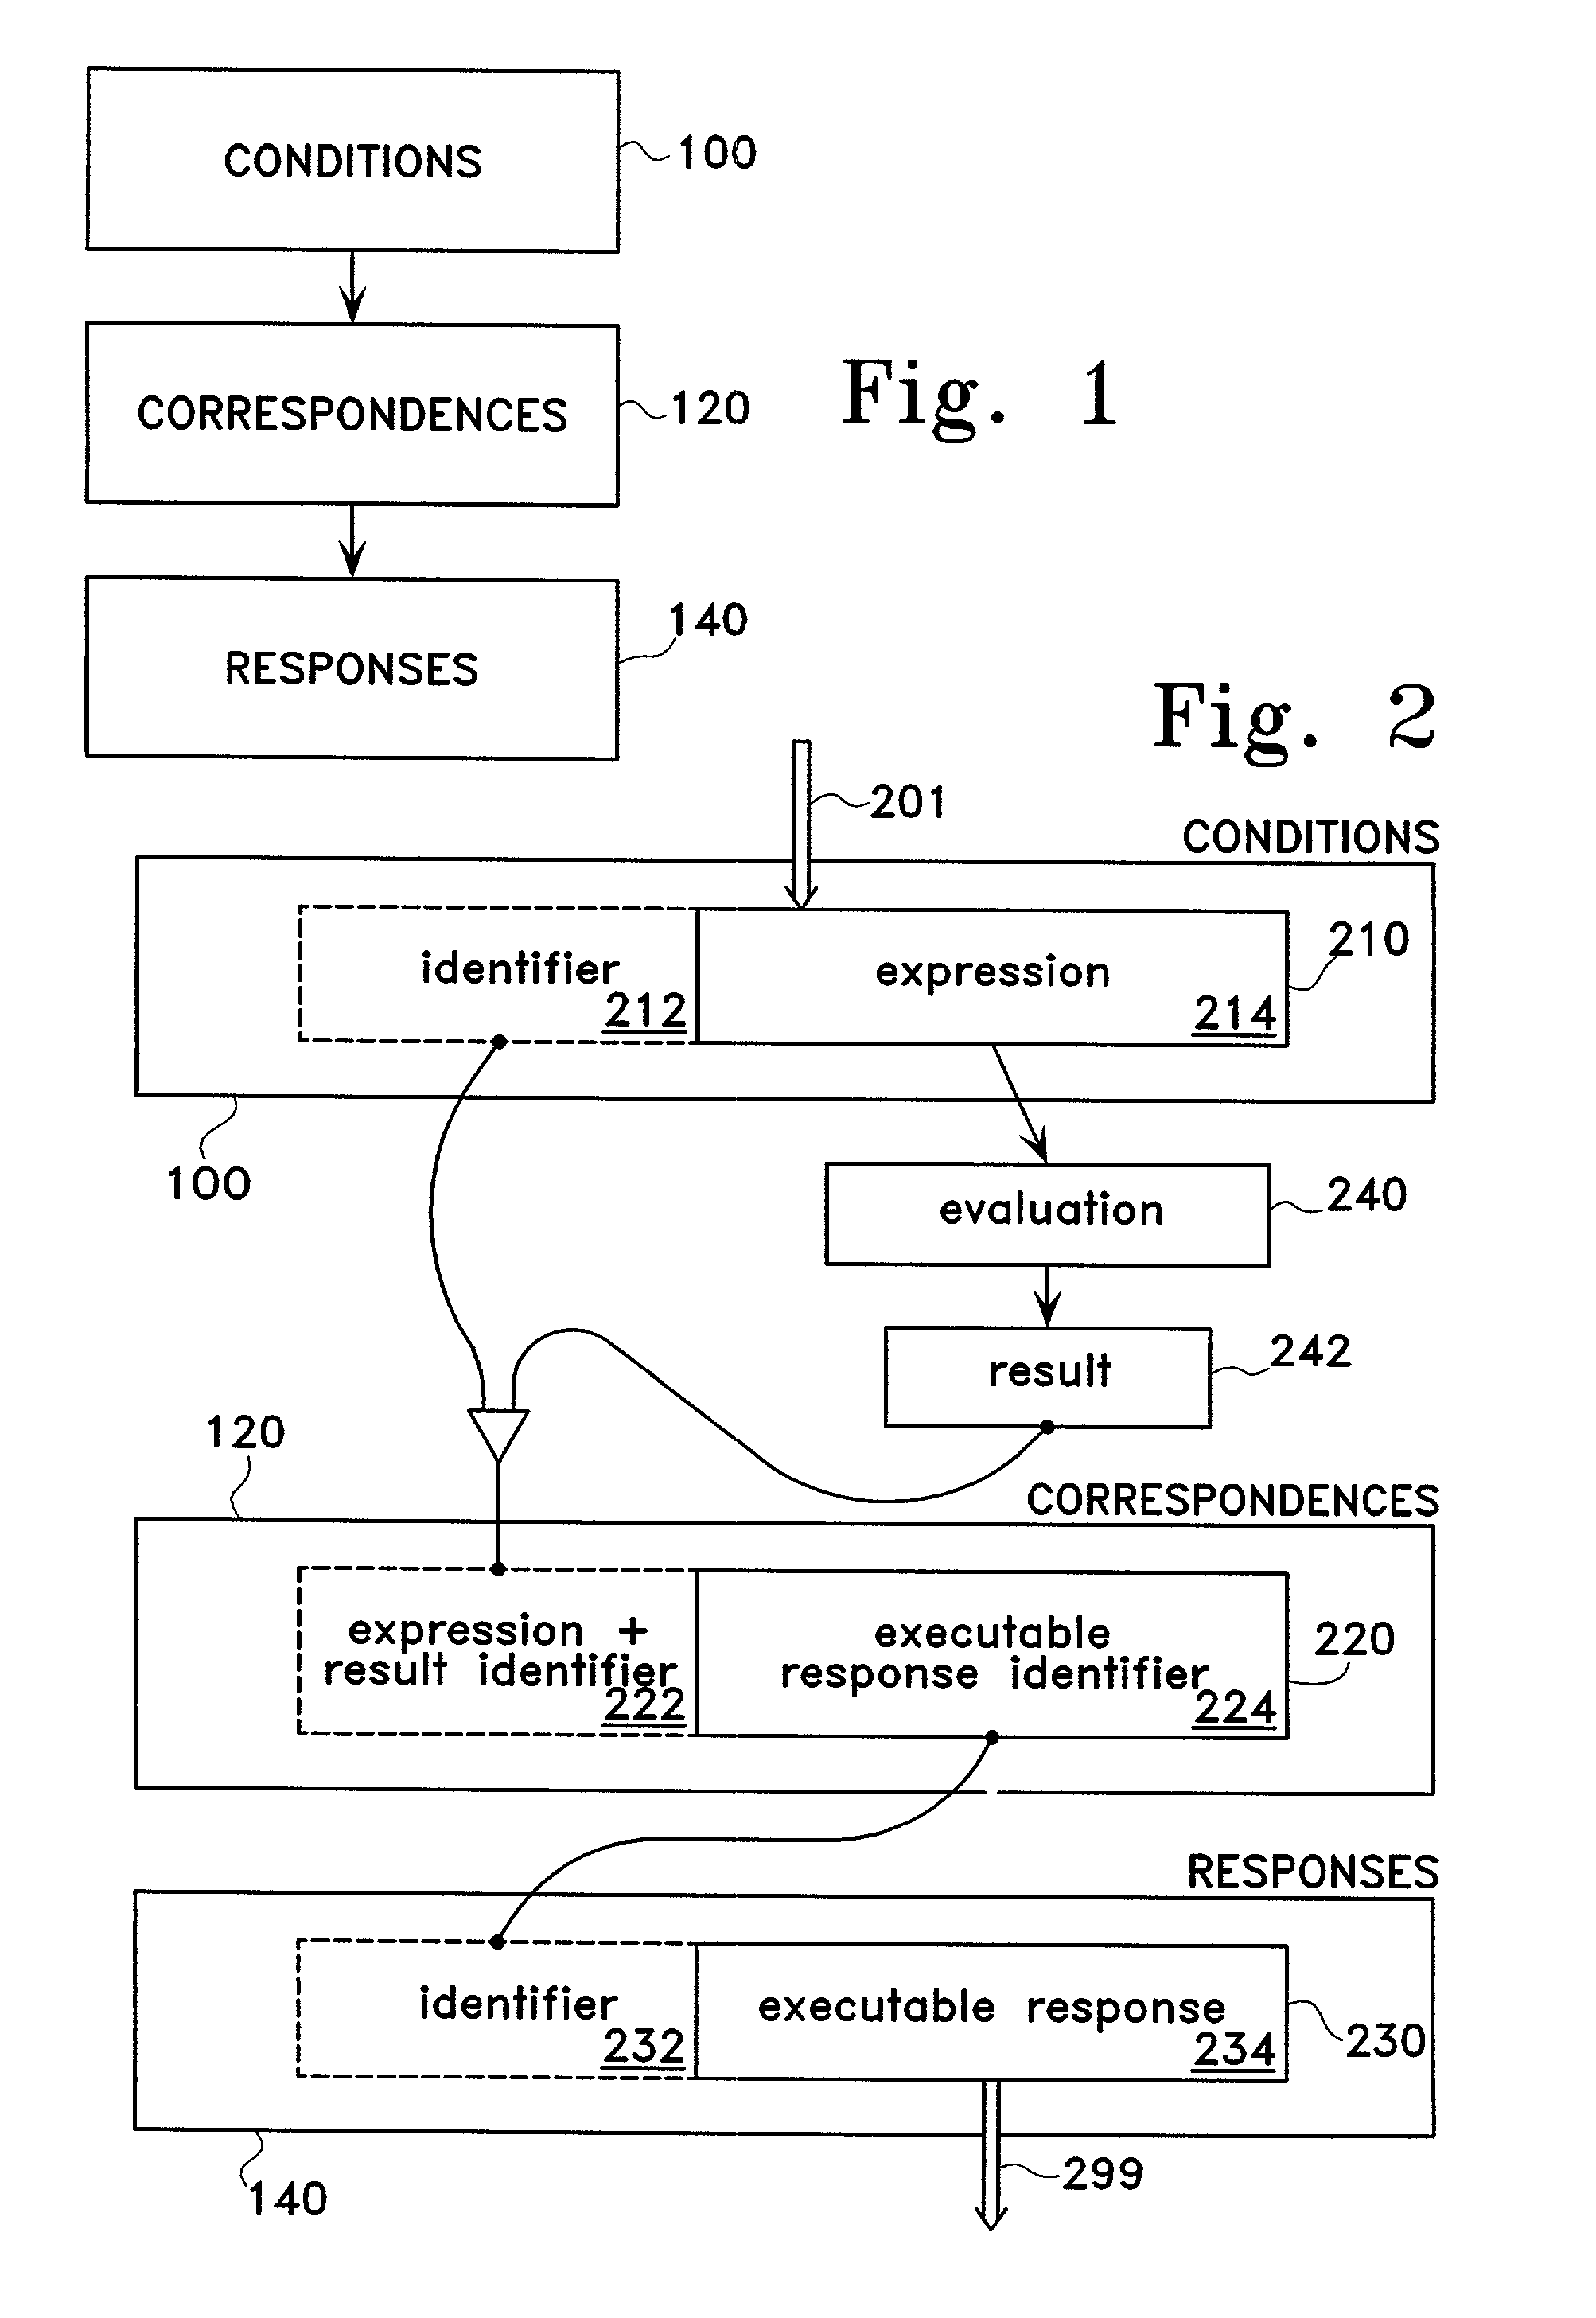 Delta model processing logic representation and execution system